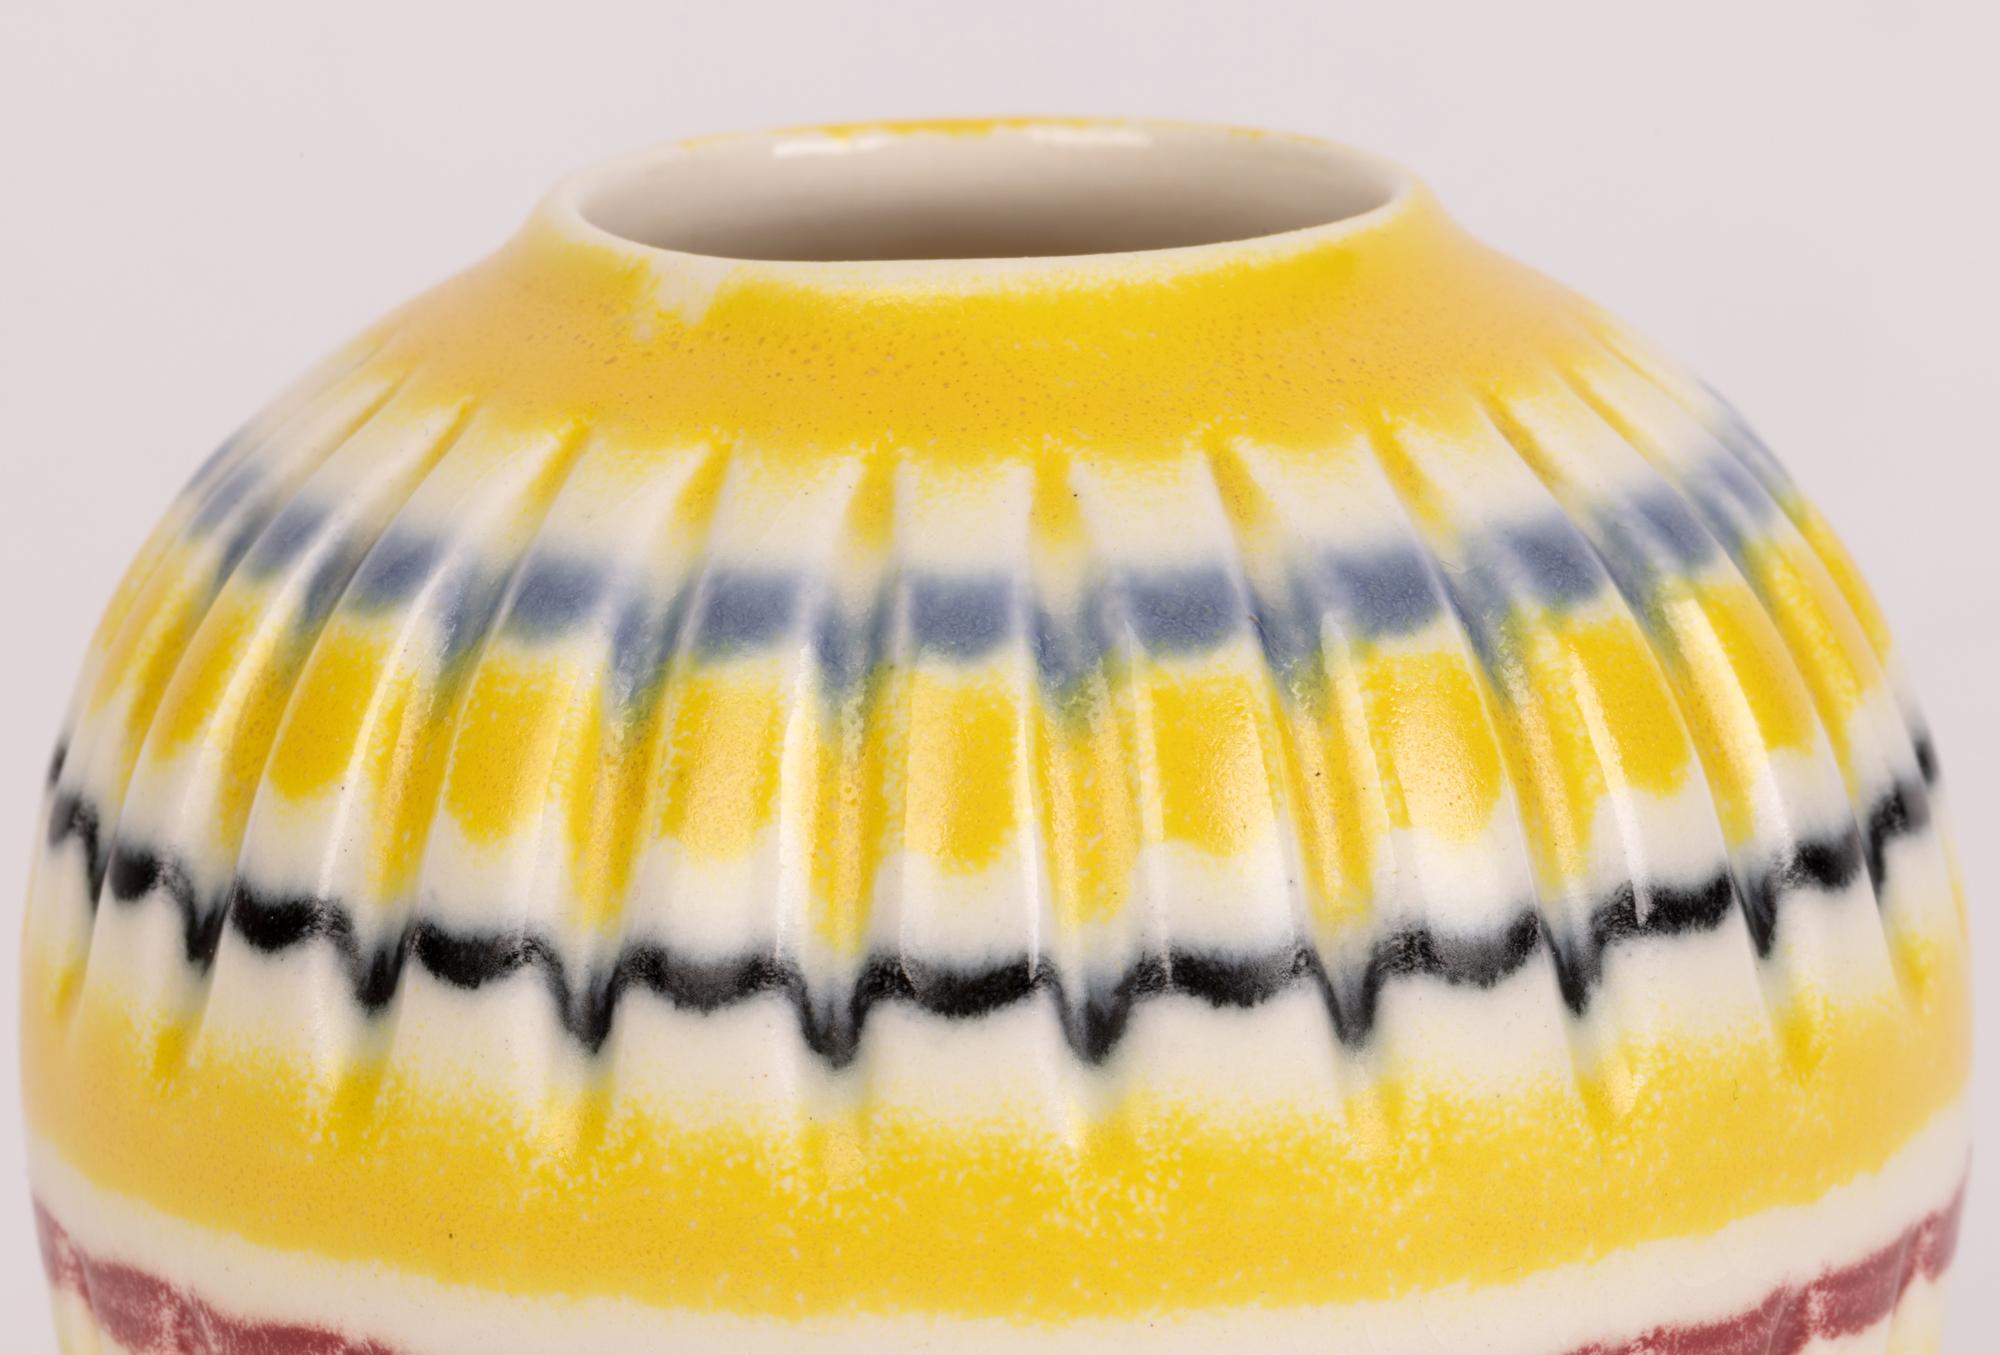 A very stylish mid-century hand painted vase decorated in the rainbow pattern by Hornsea and dating from around 1960. This finely made ceramic vase stands on a narrow round unglazed foot with a slightly recessed base and is of rounded shape with a